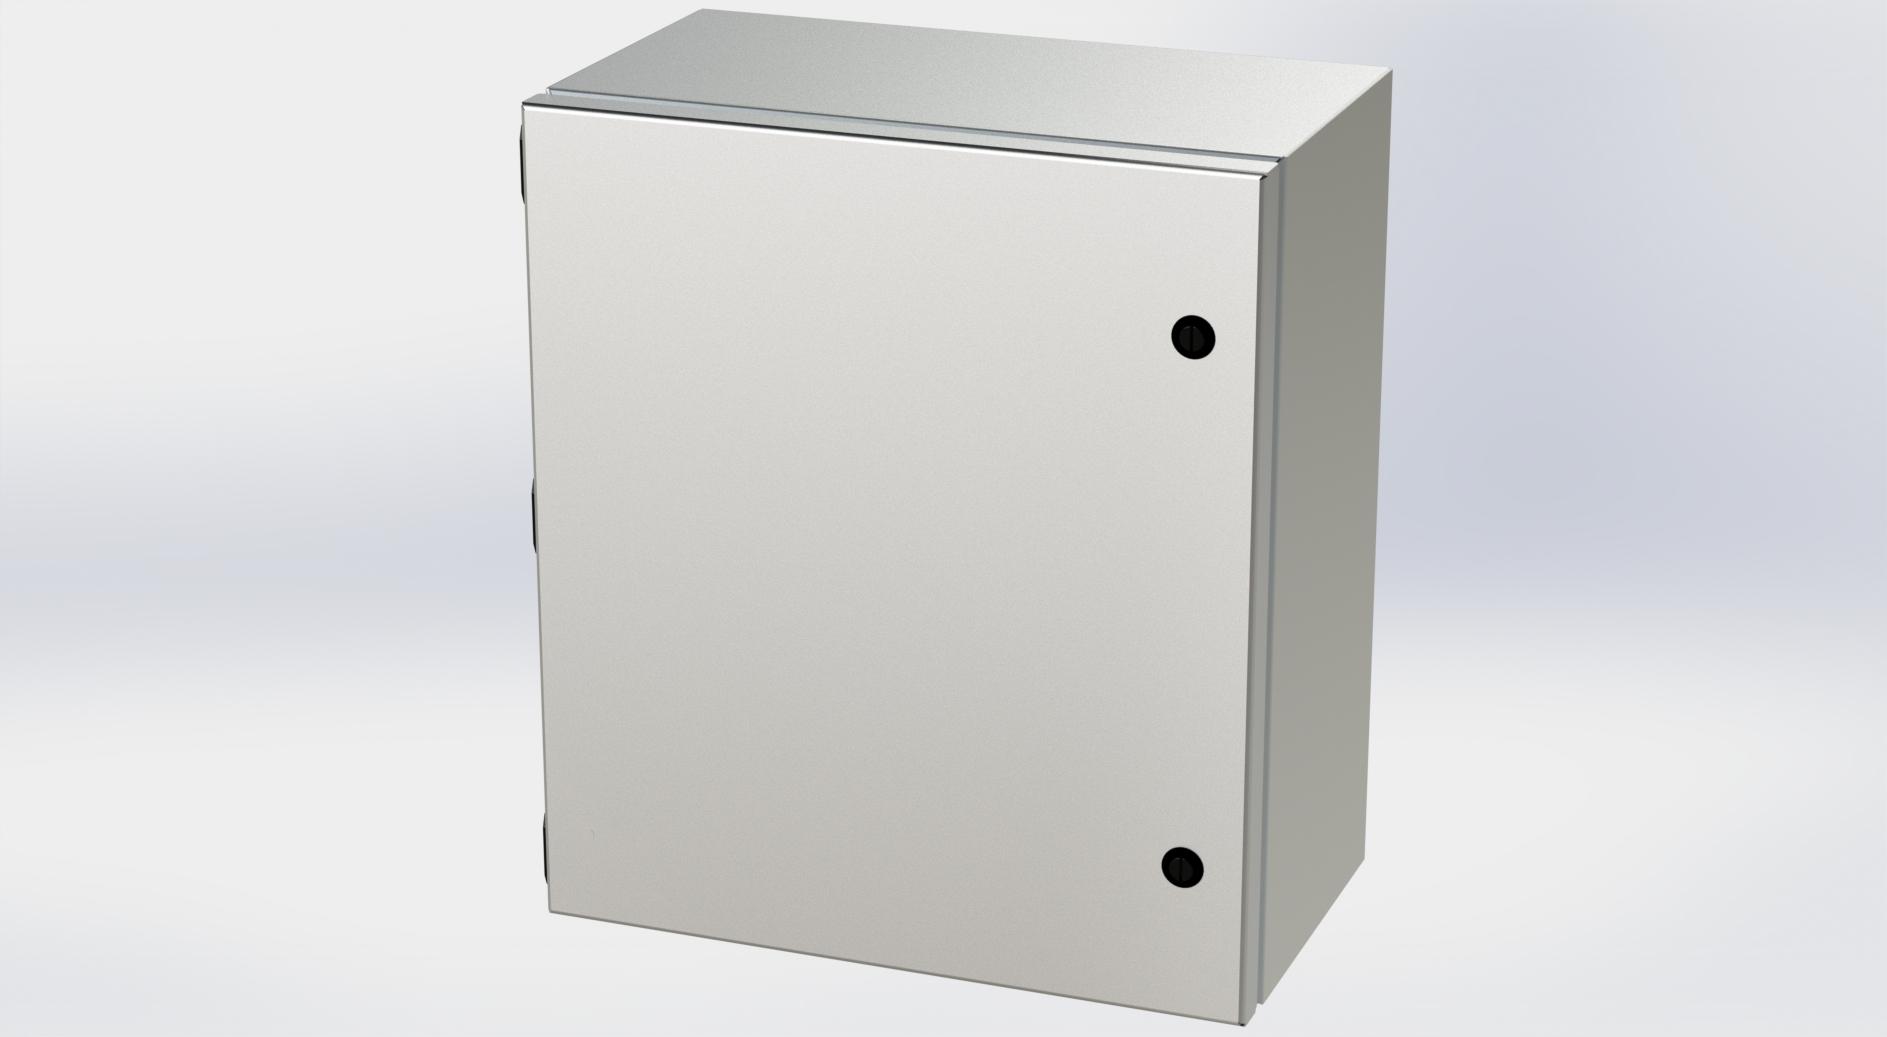 Saginaw Control SCE-16148ELJSS S.S. ELJ Enclosure, Height:16.00", Width:14.00", Depth:8.00", #4 brushed finish on all exterior surfaces. Optional sub-panels are powder coated white.